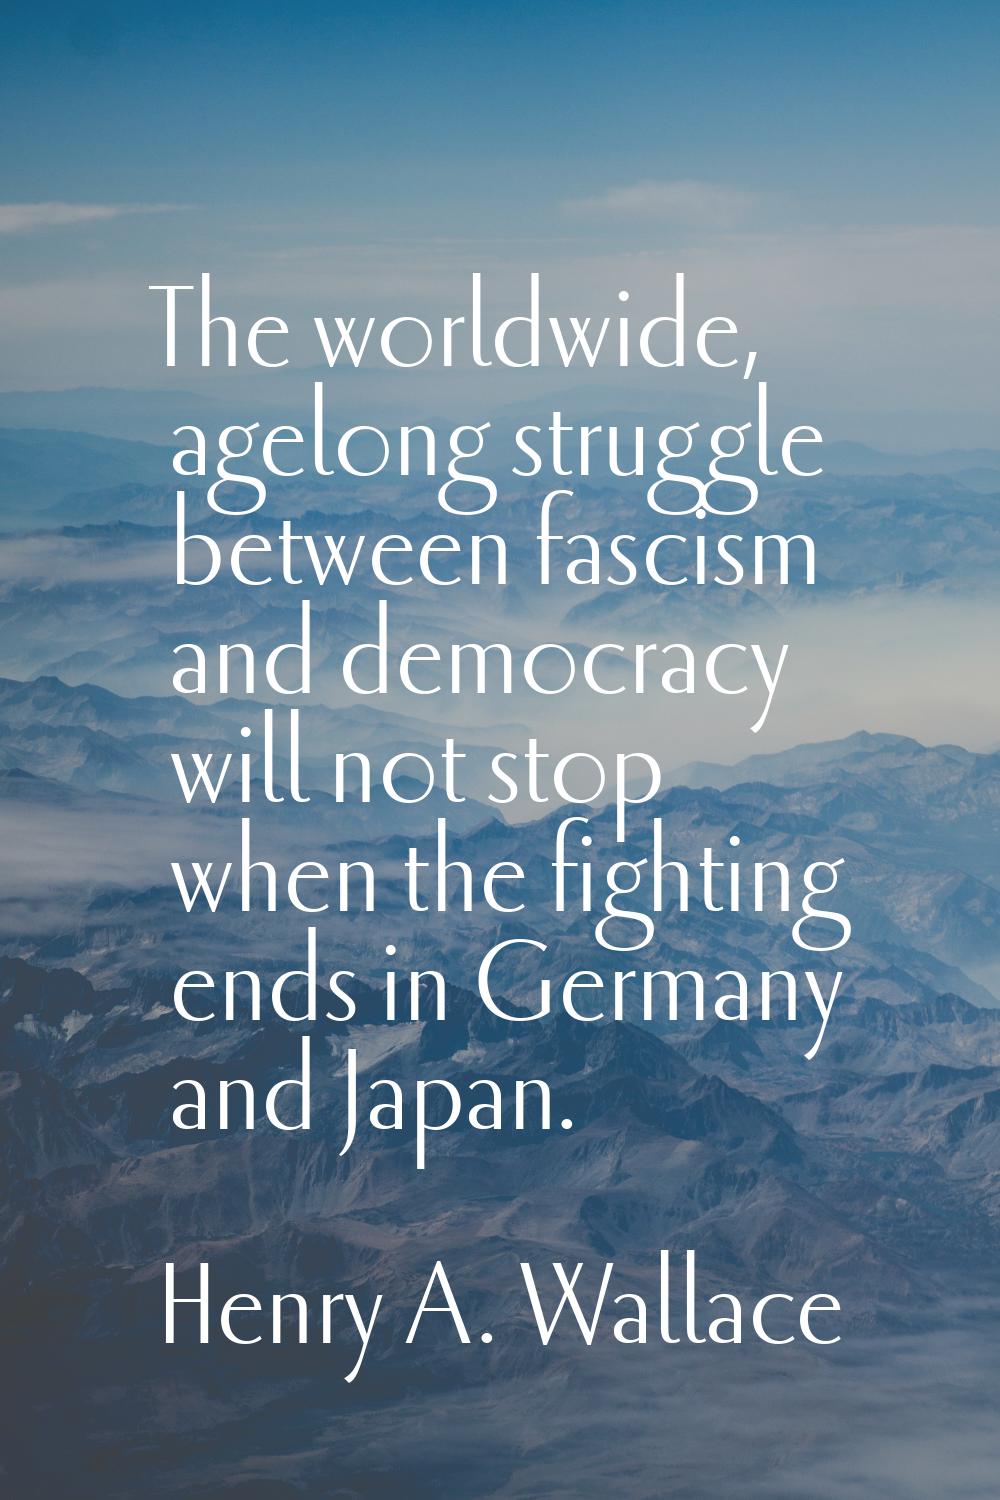 The worldwide, agelong struggle between fascism and democracy will not stop when the fighting ends 